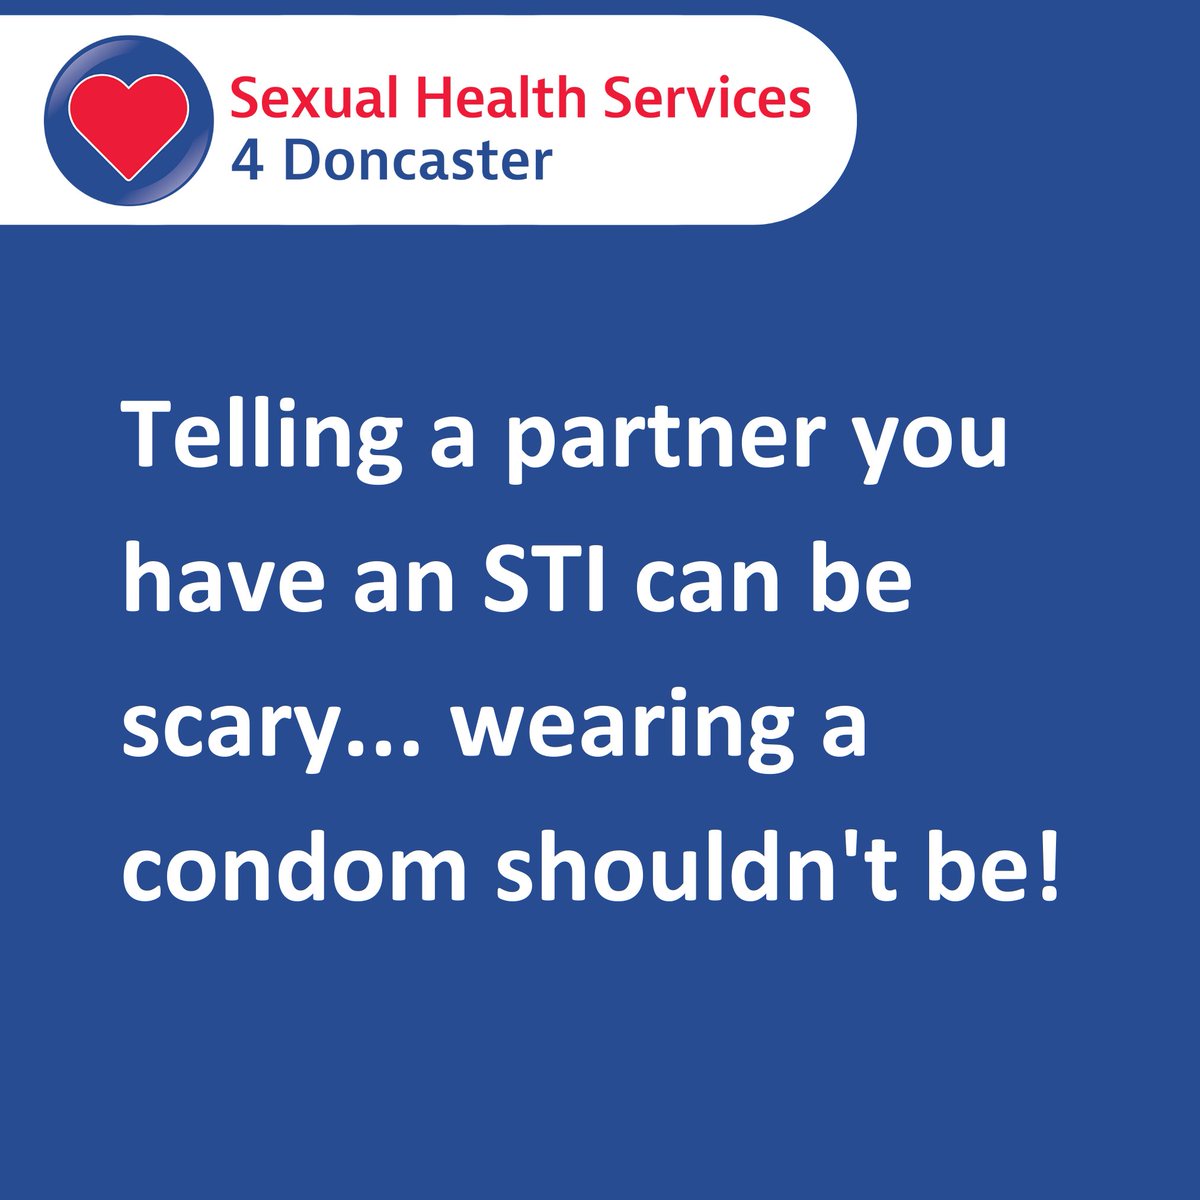 Don't let your past come back haunt you! 🧟  

Stay safe this Halloween and wear a condom! 🎃

#Halloween #HappyHalloween #SexualHealth #DoncasterSexualHealth
#WearACondom